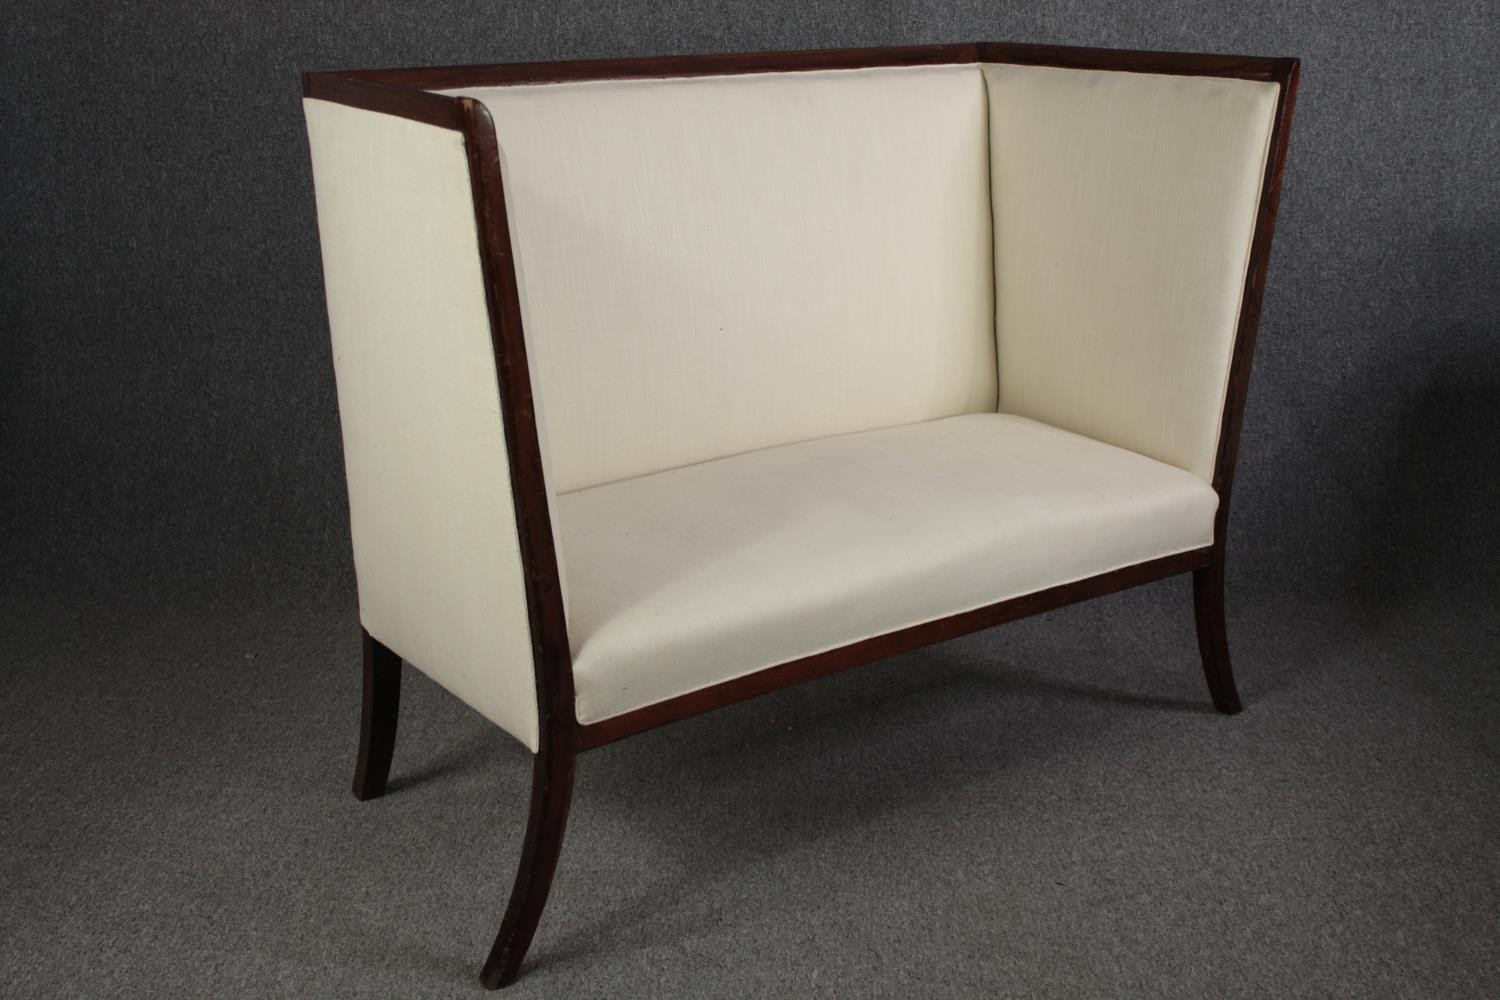 An Edwardian mahogany framed high back canape reupholstered in ivory fabric. H.106 W.137 D.62cm. - Image 2 of 4